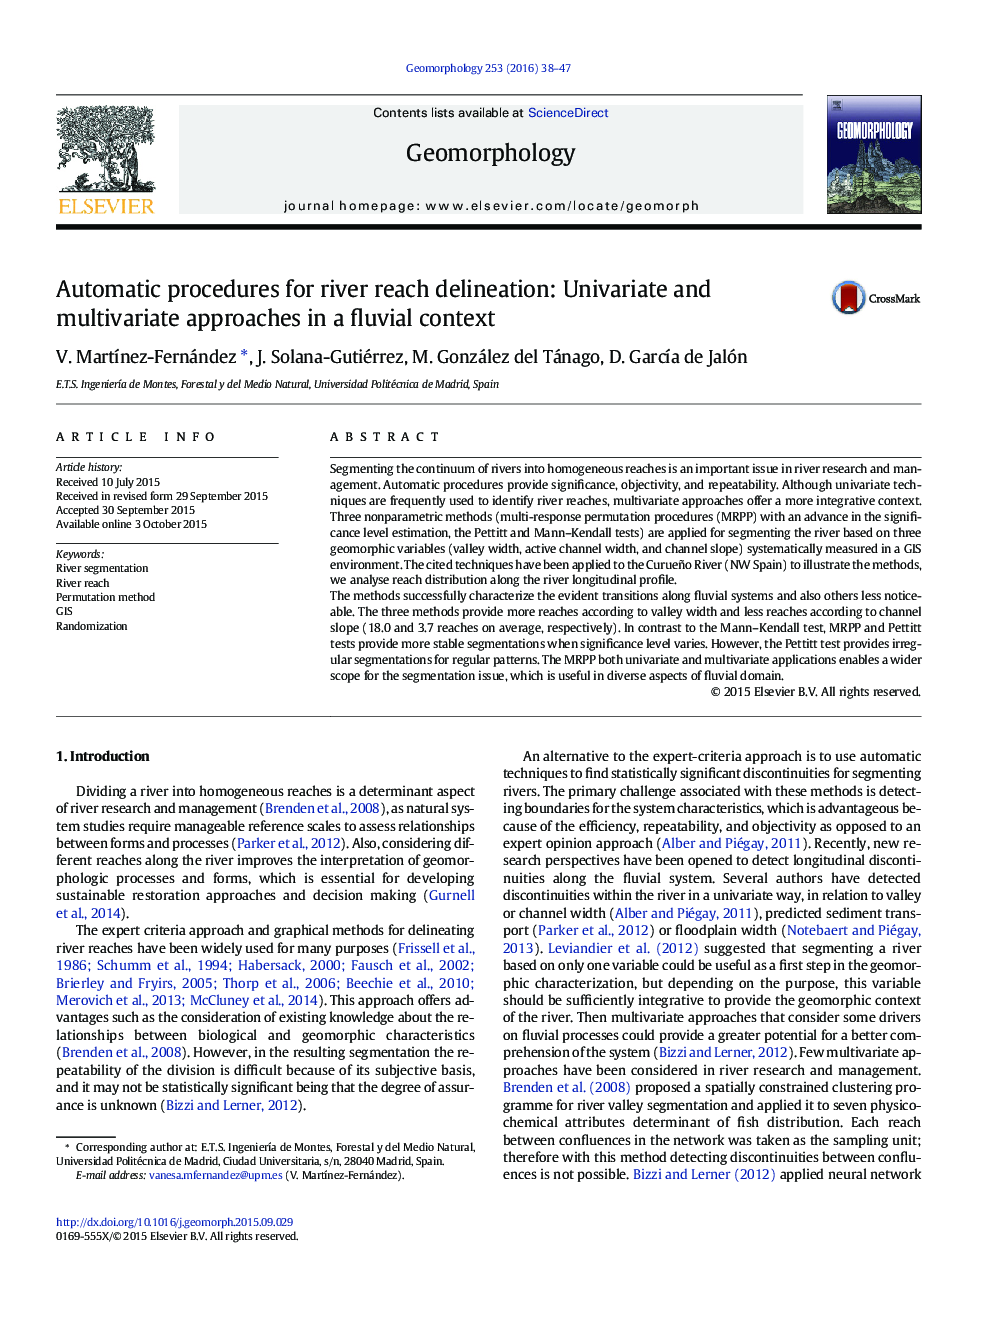 Automatic procedures for river reach delineation: Univariate and multivariate approaches in a fluvial context